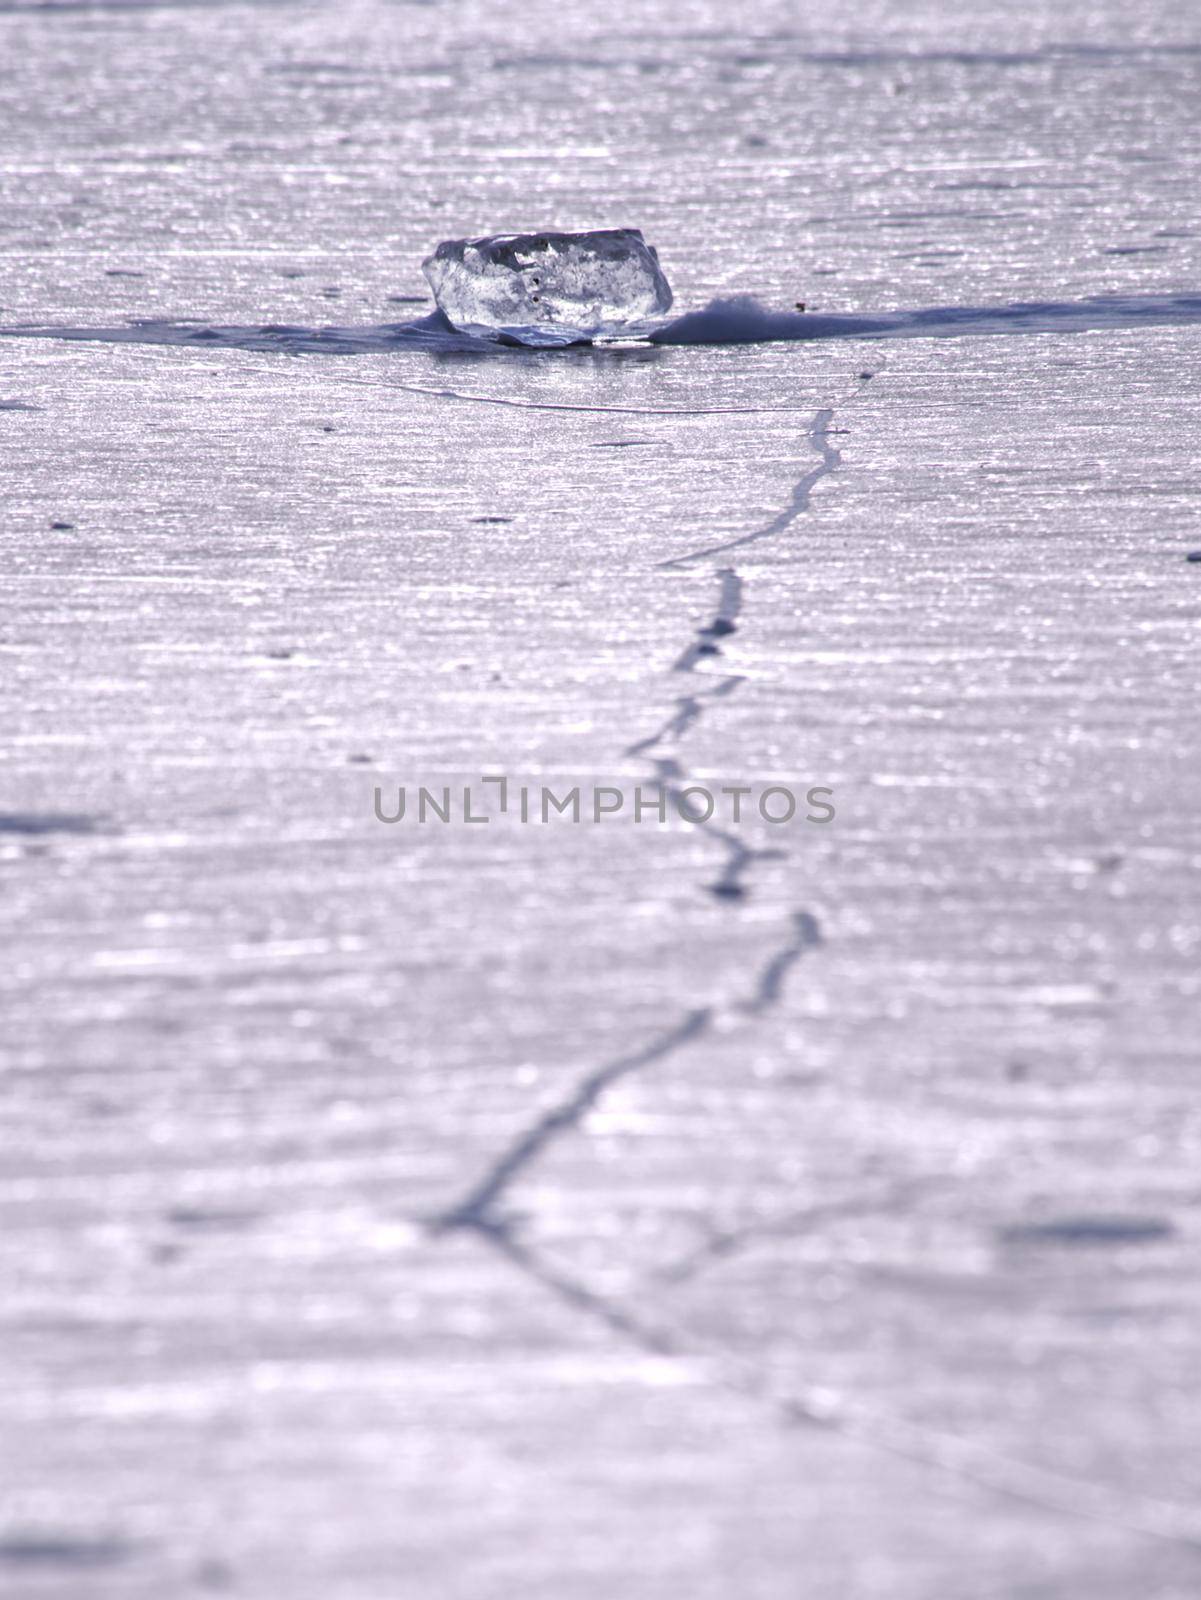 Shards of cracked ice jut out on the frozen lake. The light phenomenon occurs around a very specific time of year